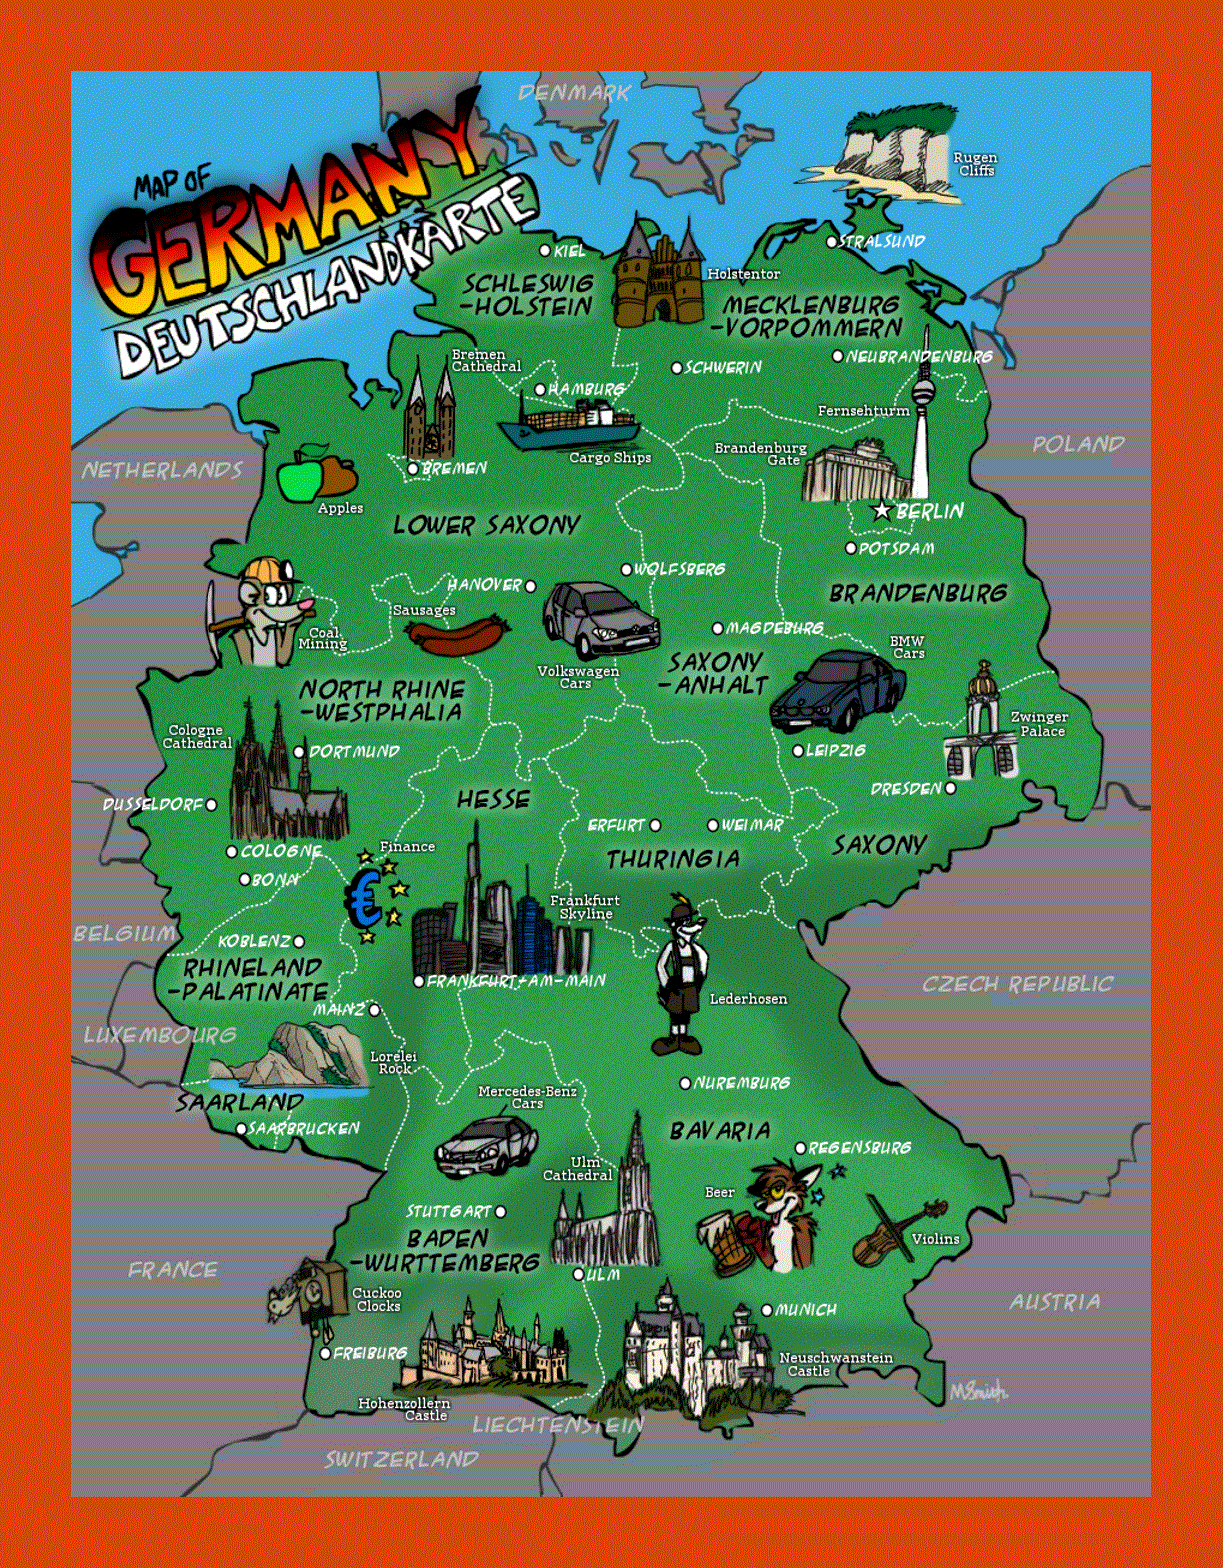 Illustrated map of Germany